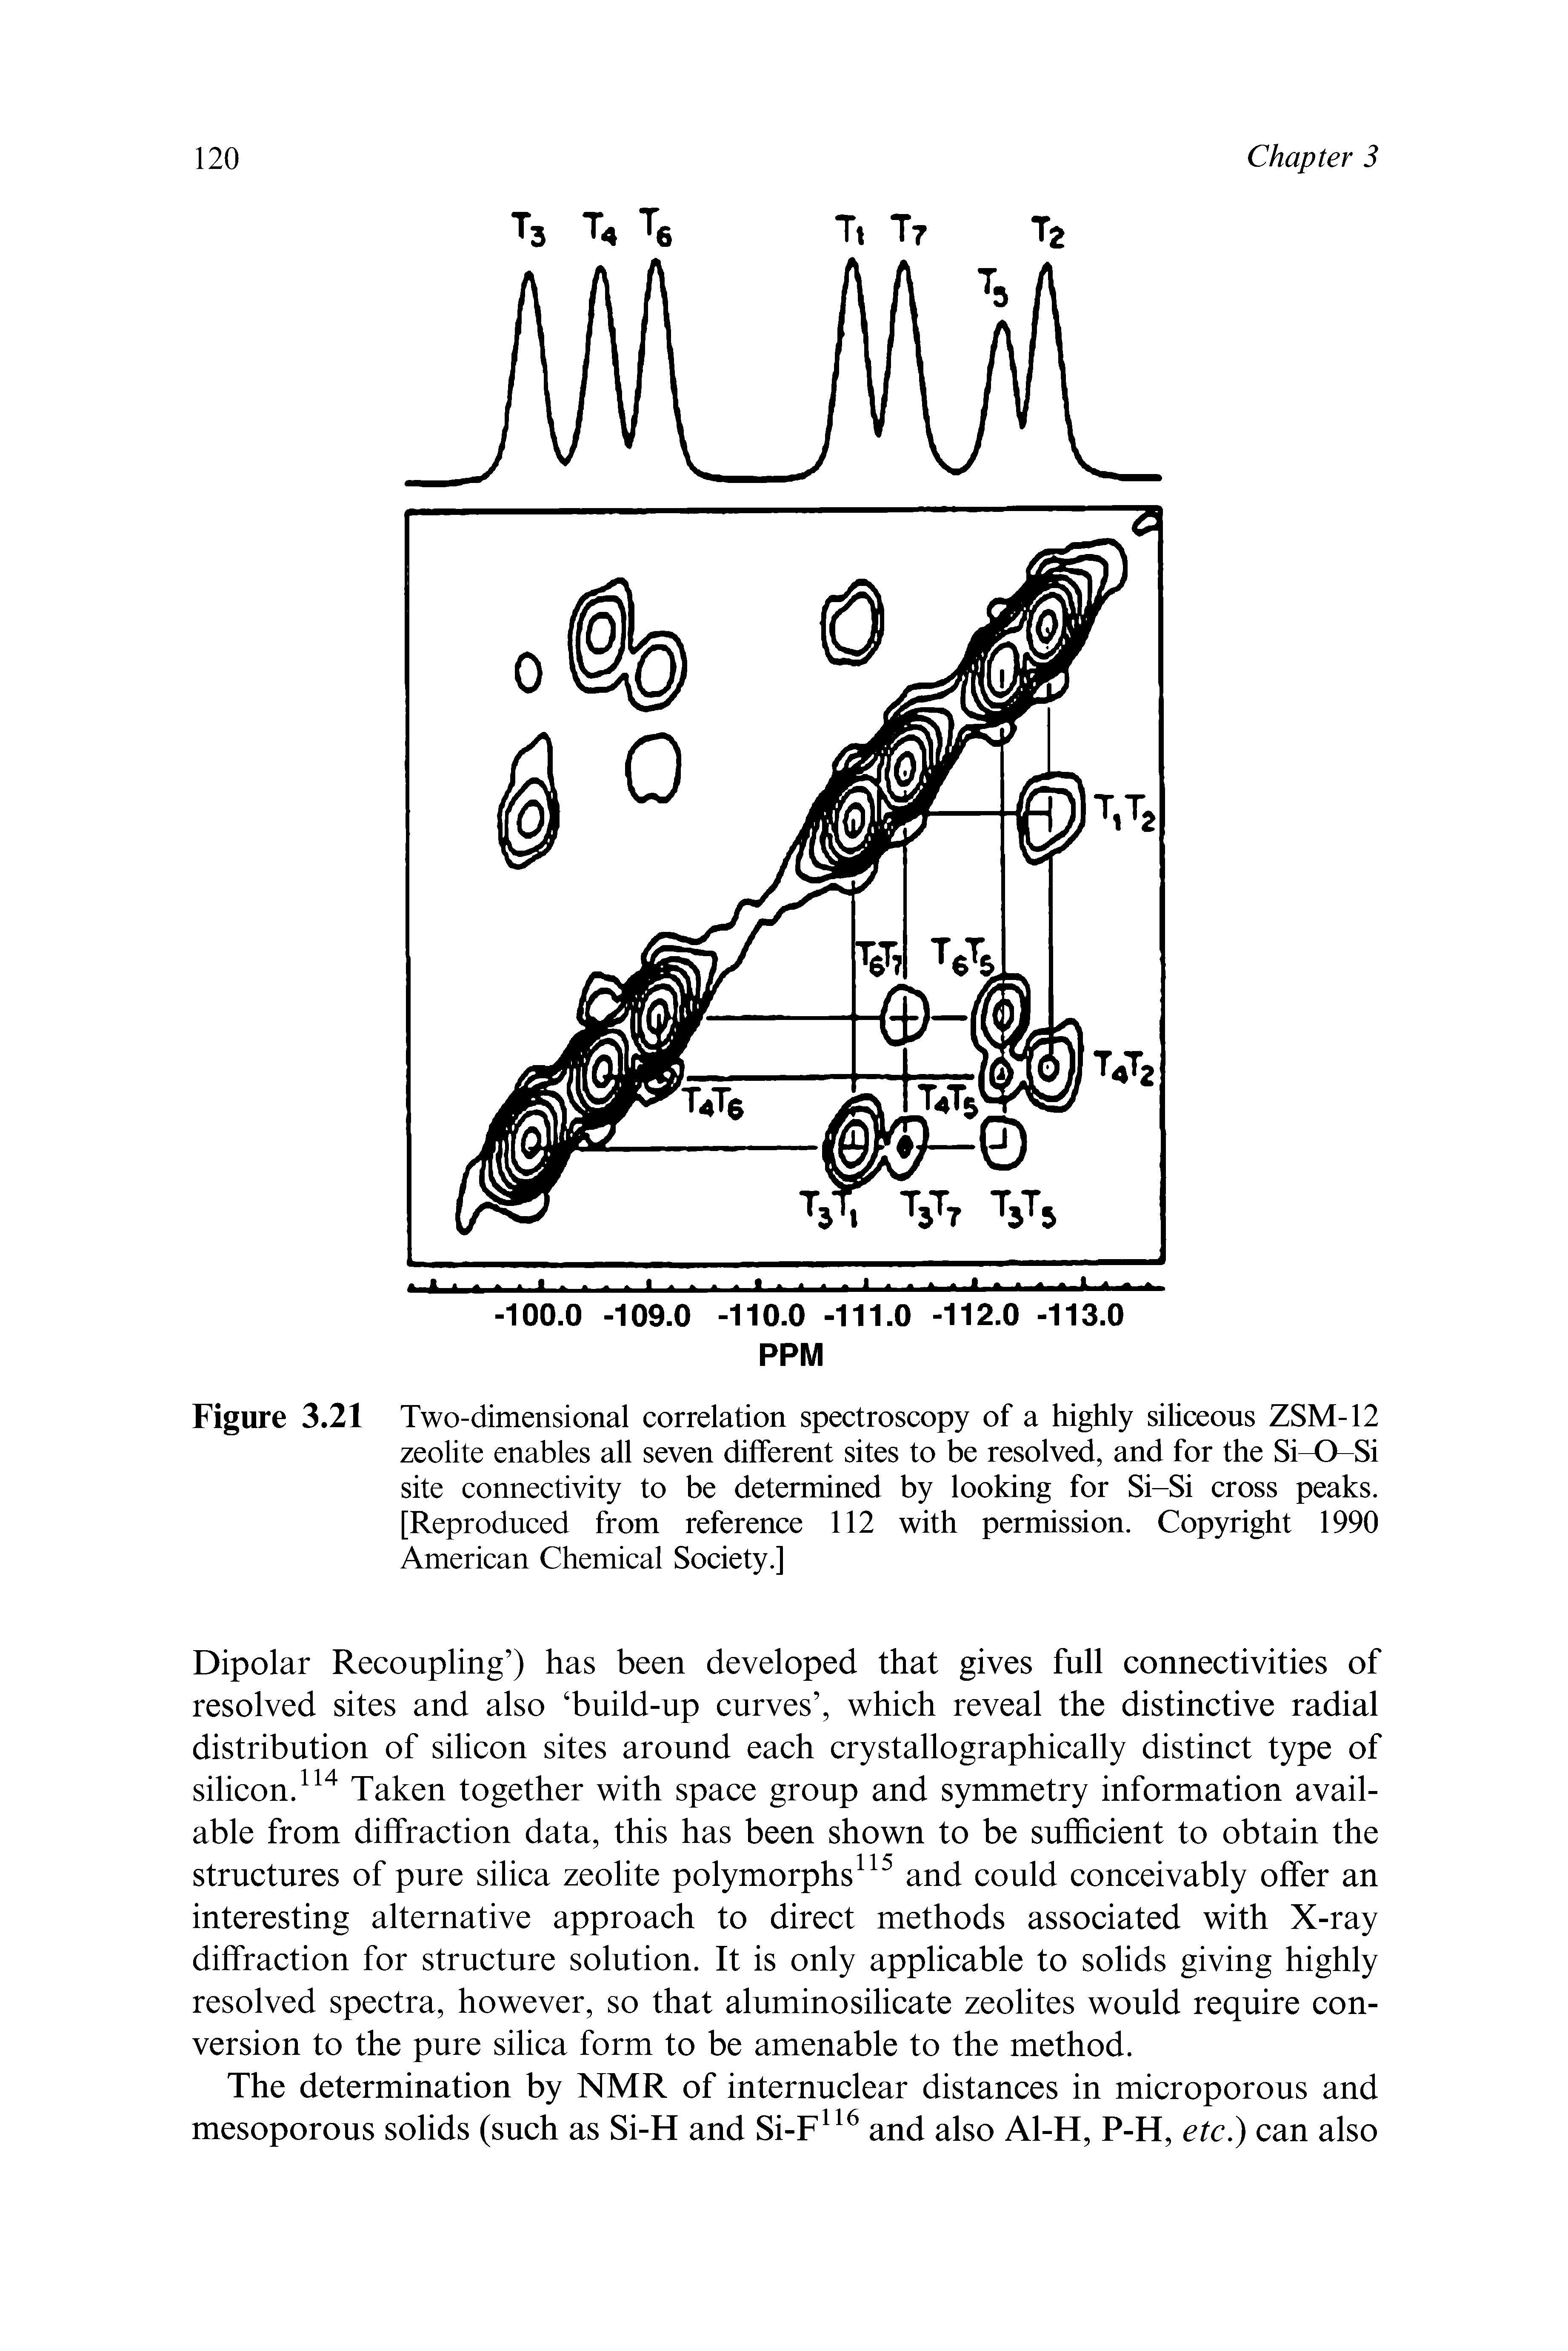 Figure 3.21 Two-dimensional correlation spectroscopy of a highly siliceous ZSM-12 zeolite enables all seven different sites to be resolved, and for the Si-O-Si site connectivity to be determined by looking for Si-Si cross peaks. [Reproduced from reference 112 with permission. Copyright 1990...